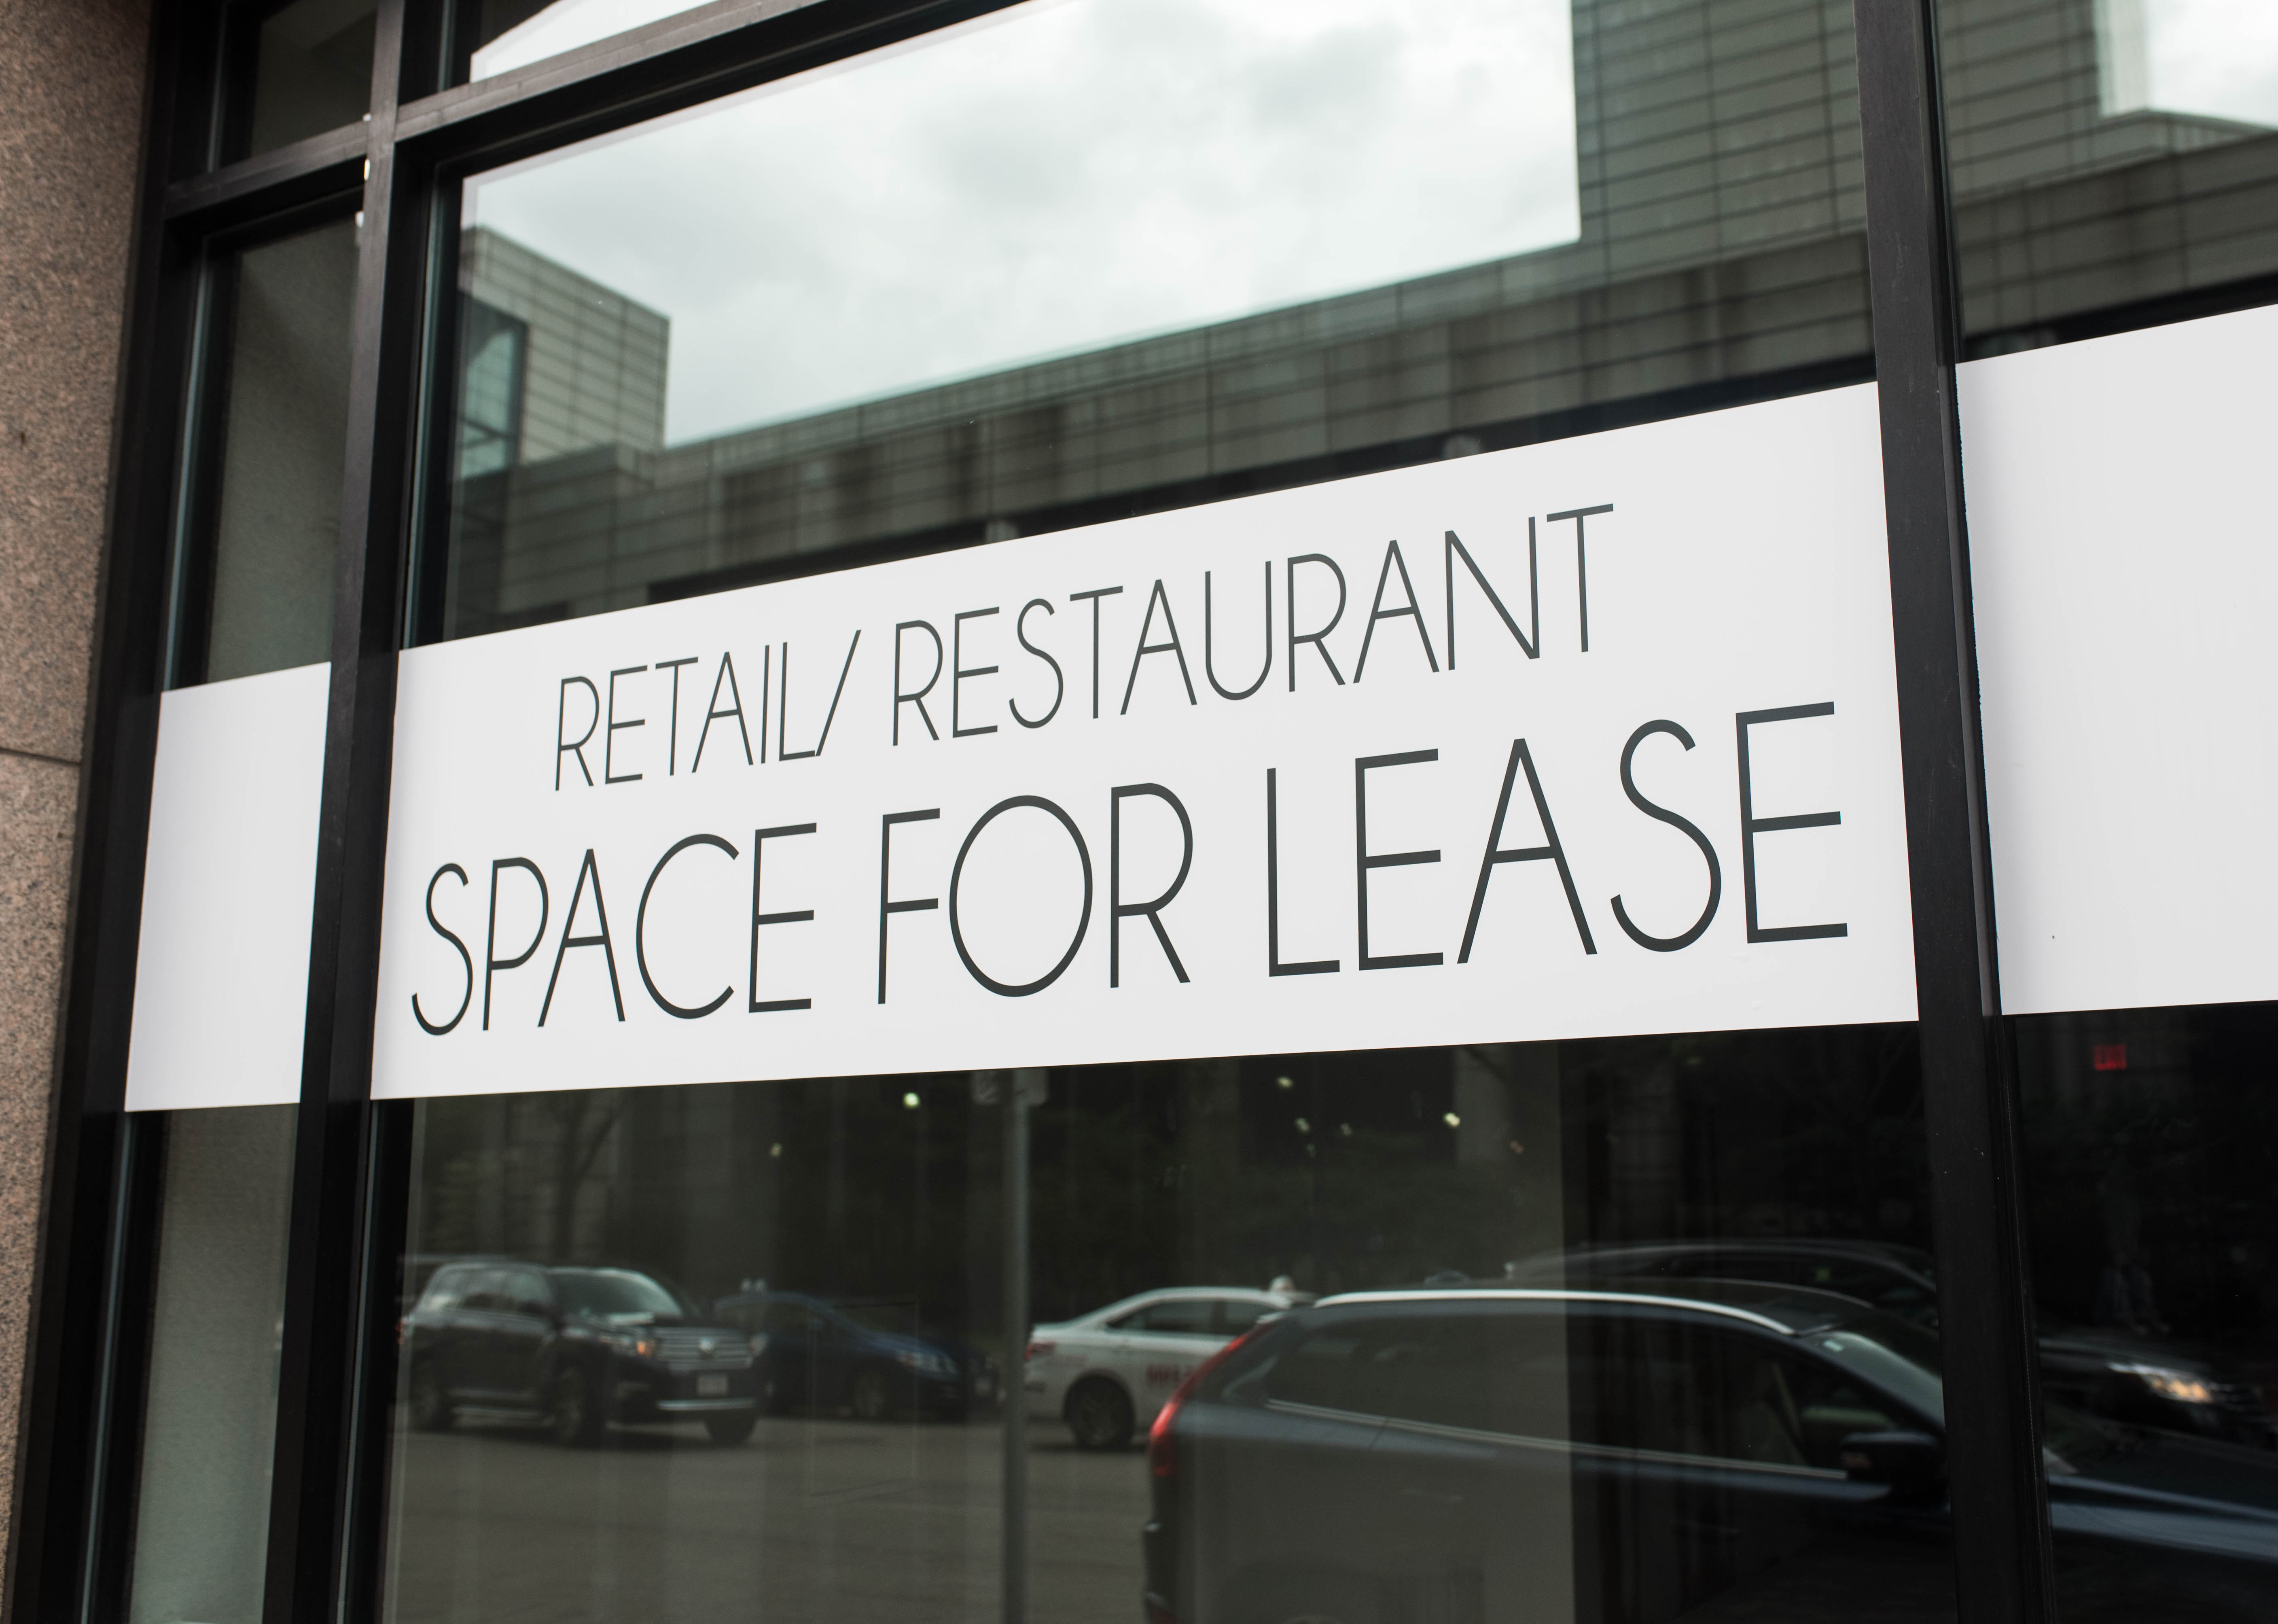 Space For Lease window signage